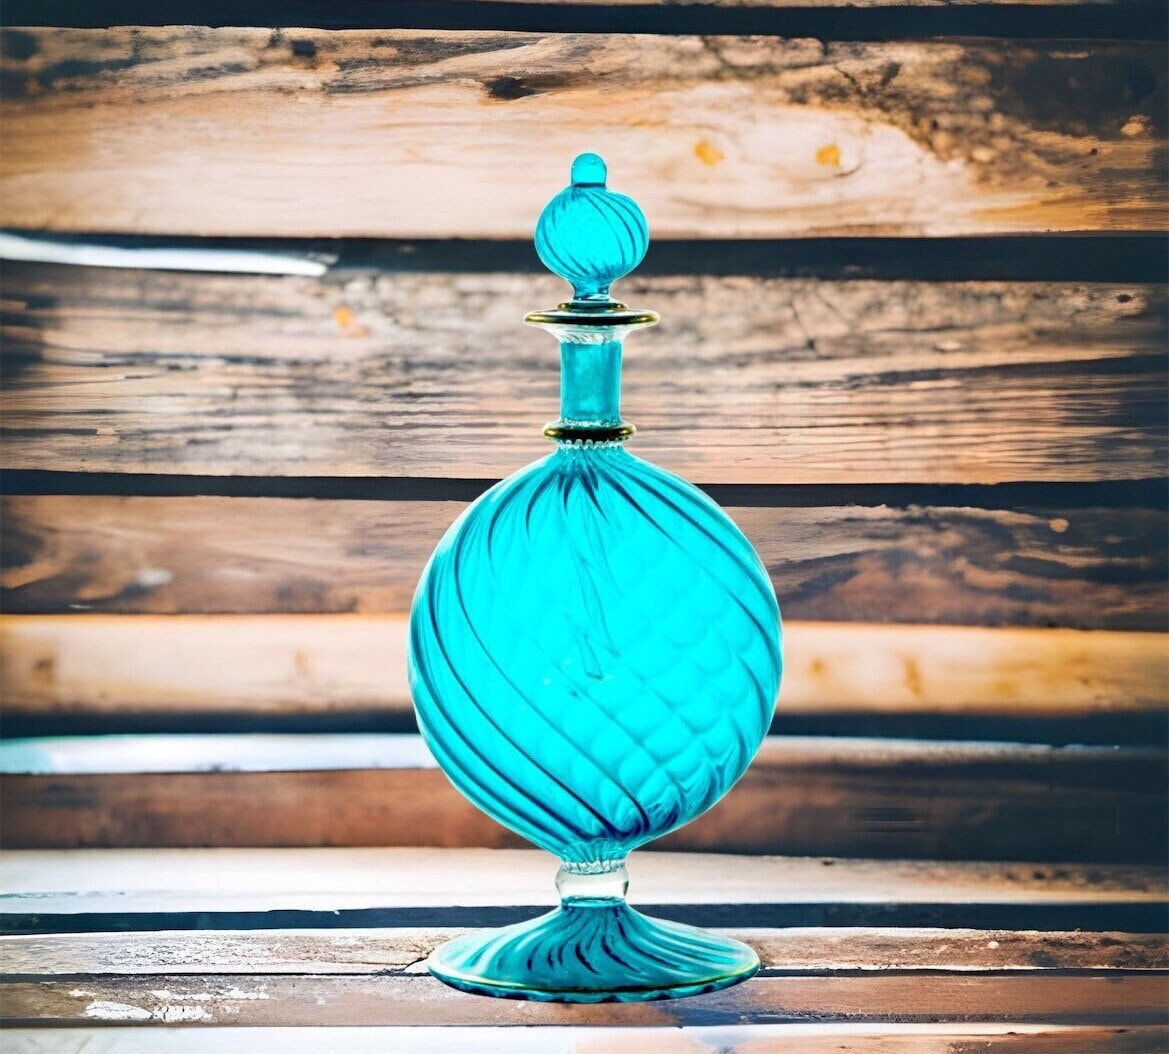 Perfume bottle - Turquoise Ribbed Glass -  hand painted - perfume bottles with stopper - empty perfume bottle - Decorative bottle for shelf